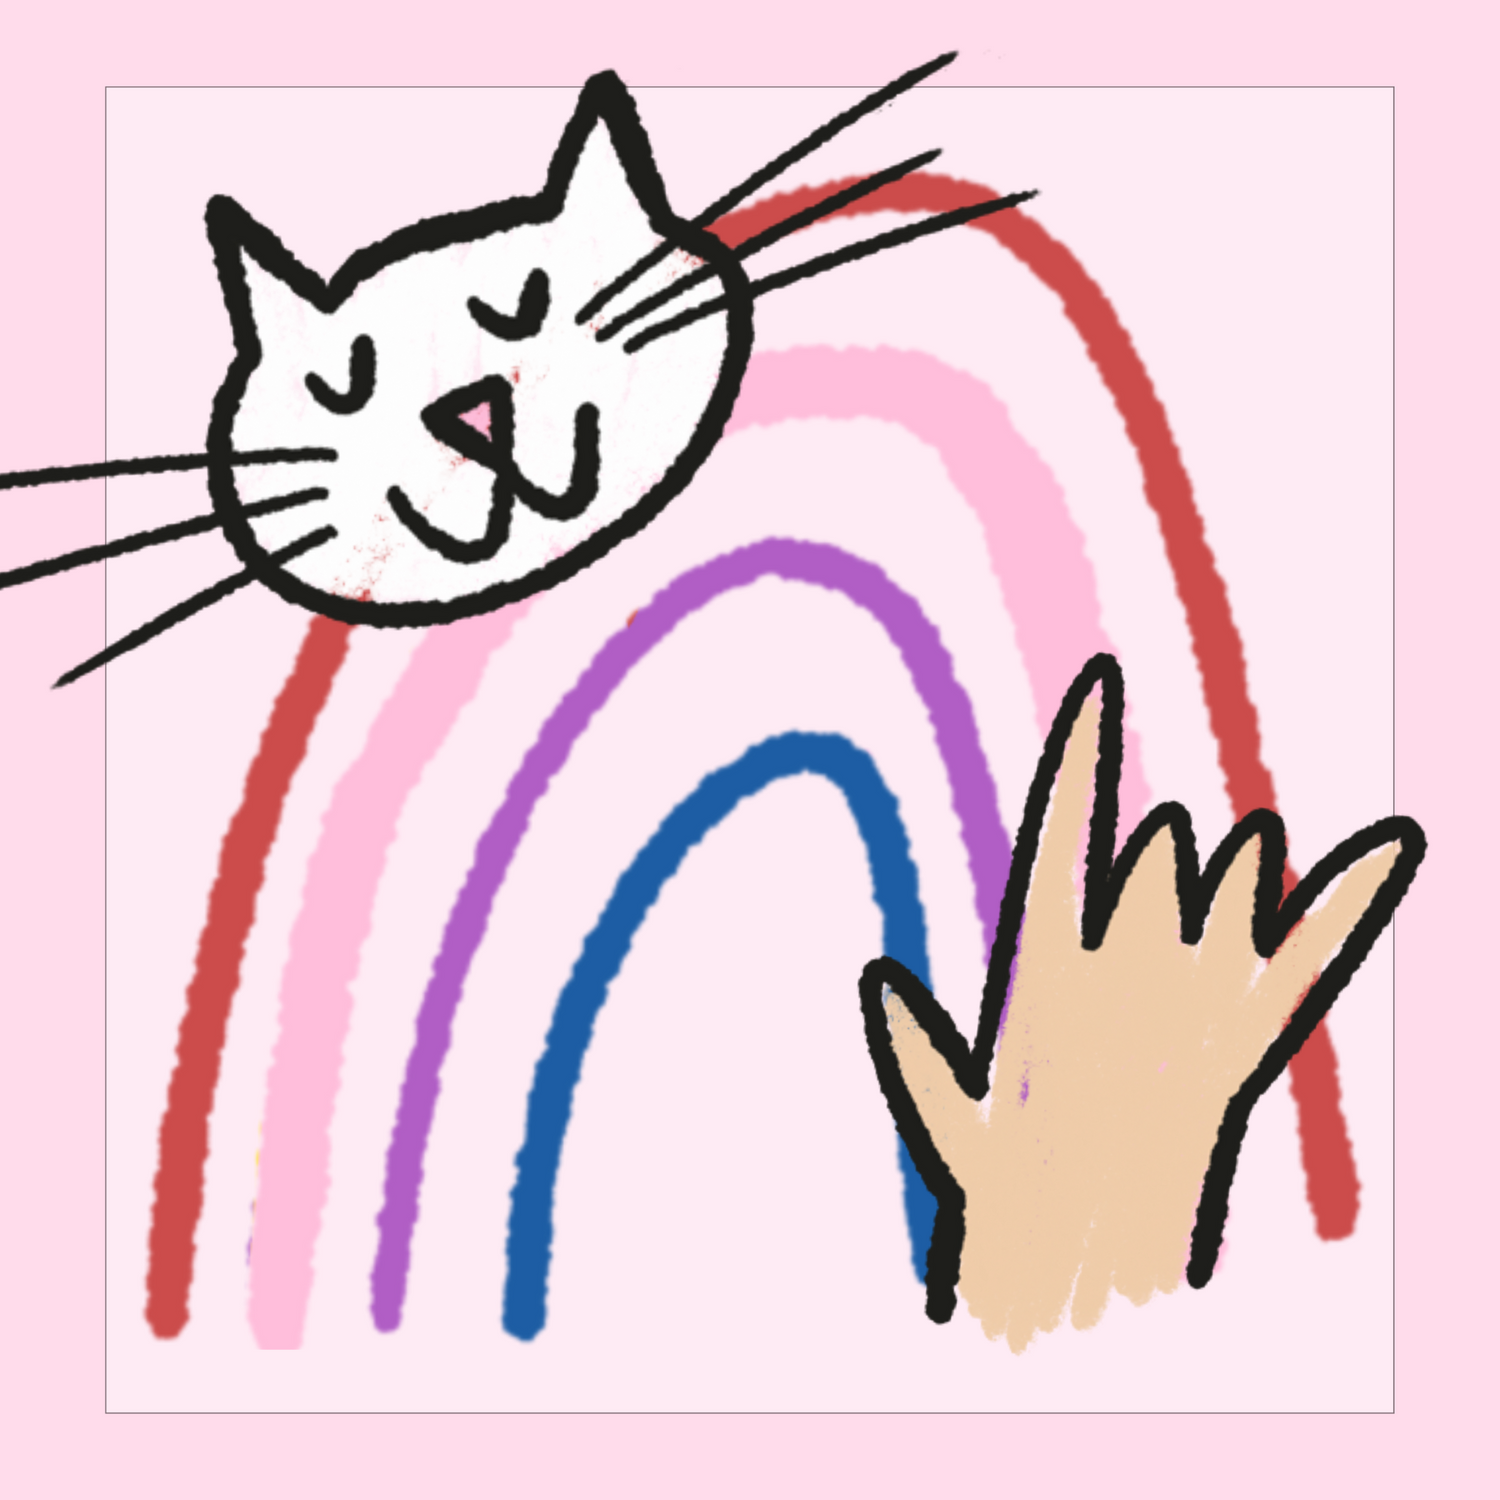 Rainbows, Whiskers on Kittens and an American Sign Language handshape for "I Love You" representing self publish author and illustrator Lindsay Dain's favorite things